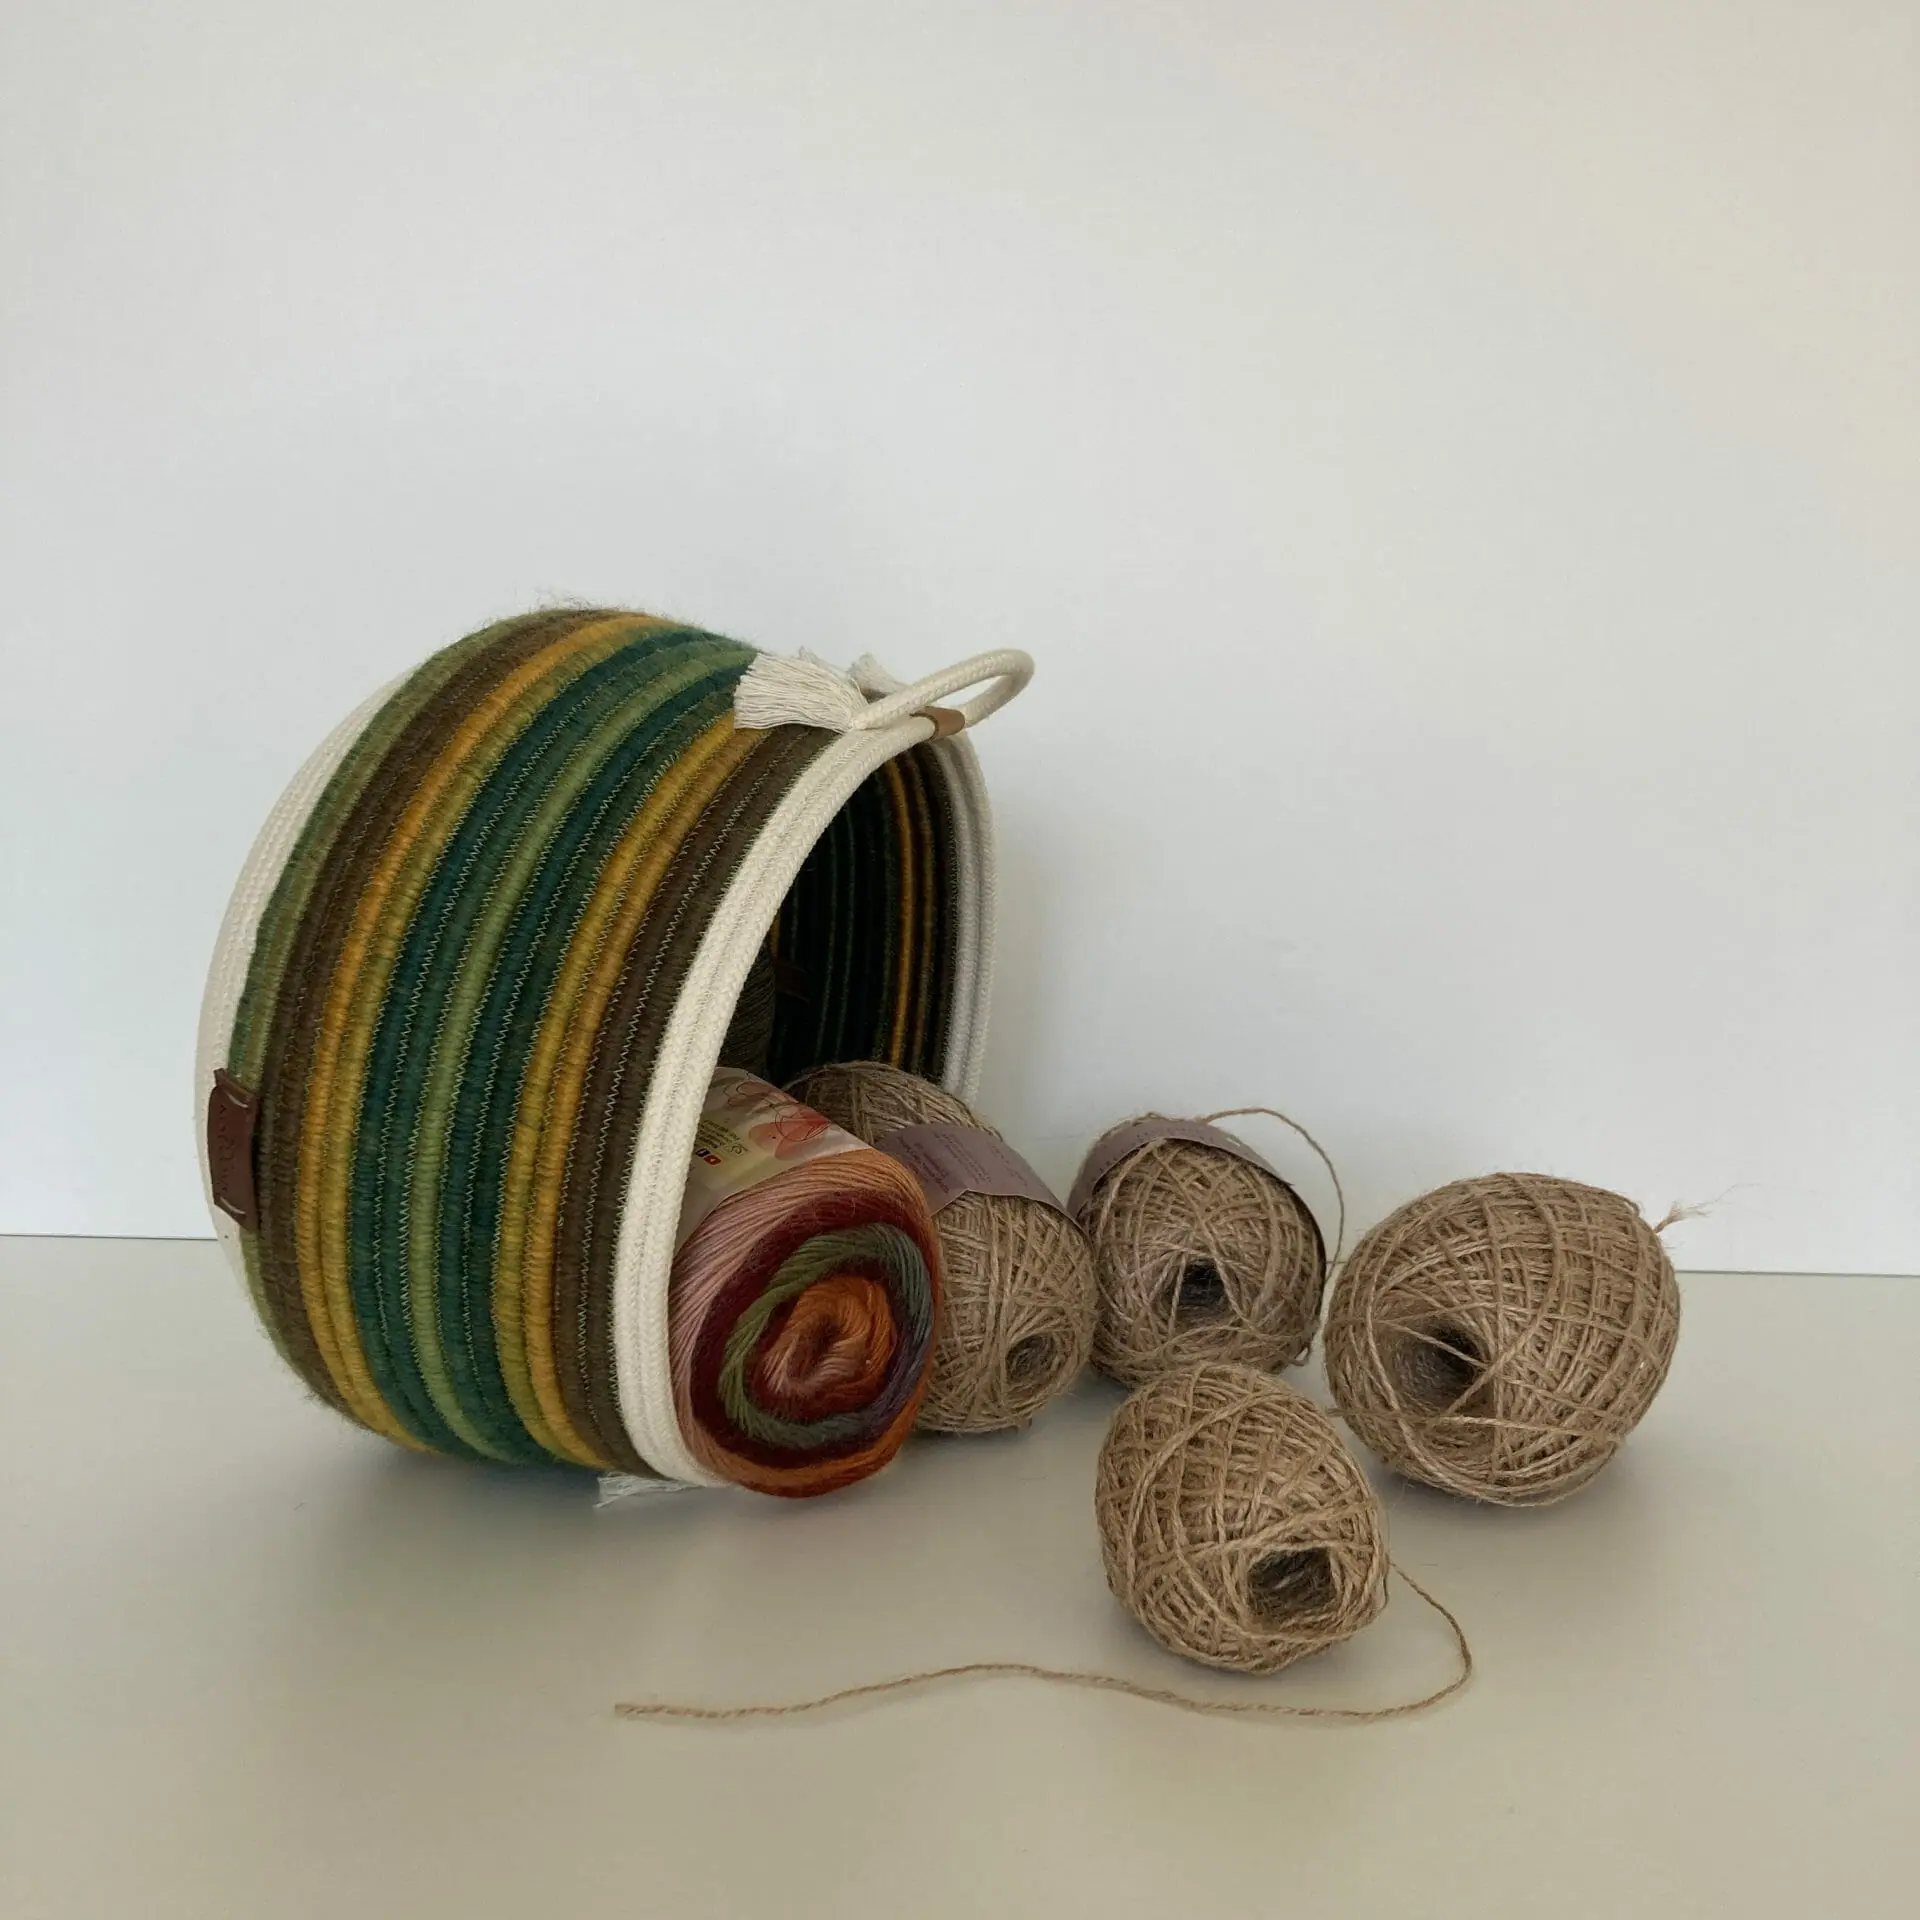 Green basket with handles 16 cm x 21.5 cm Cotton rope basket